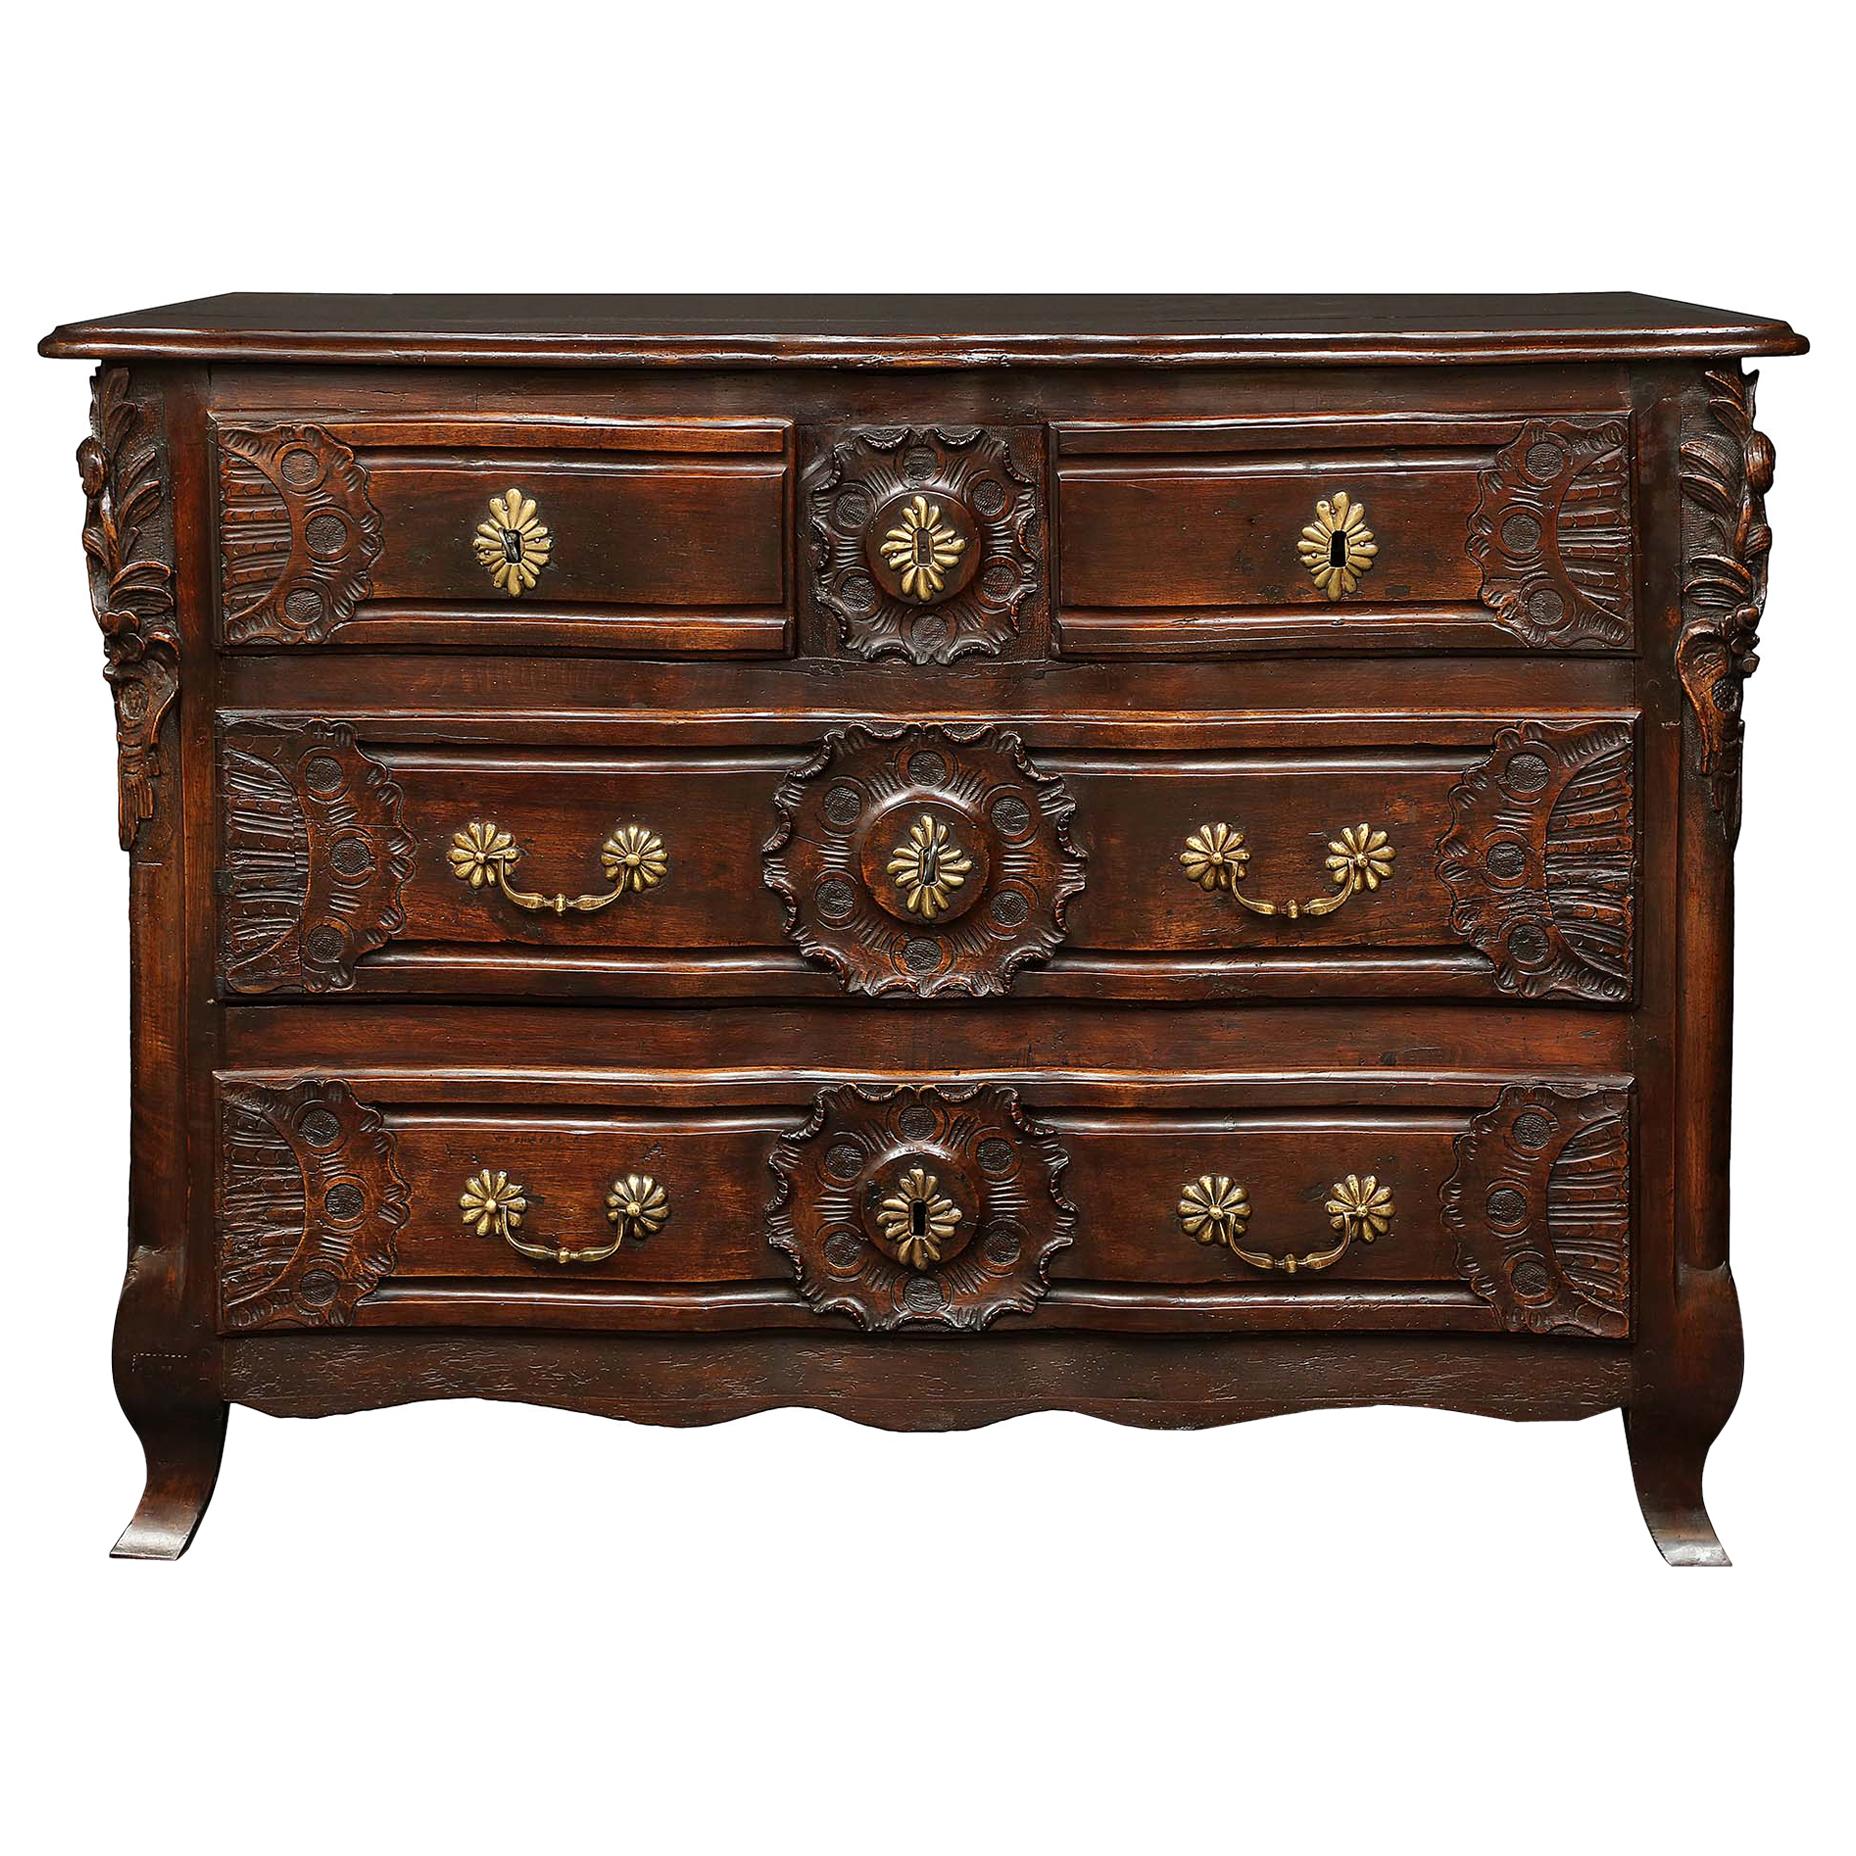 French Provincial 18th Century Louis XV Period Walnut Commode For Sale